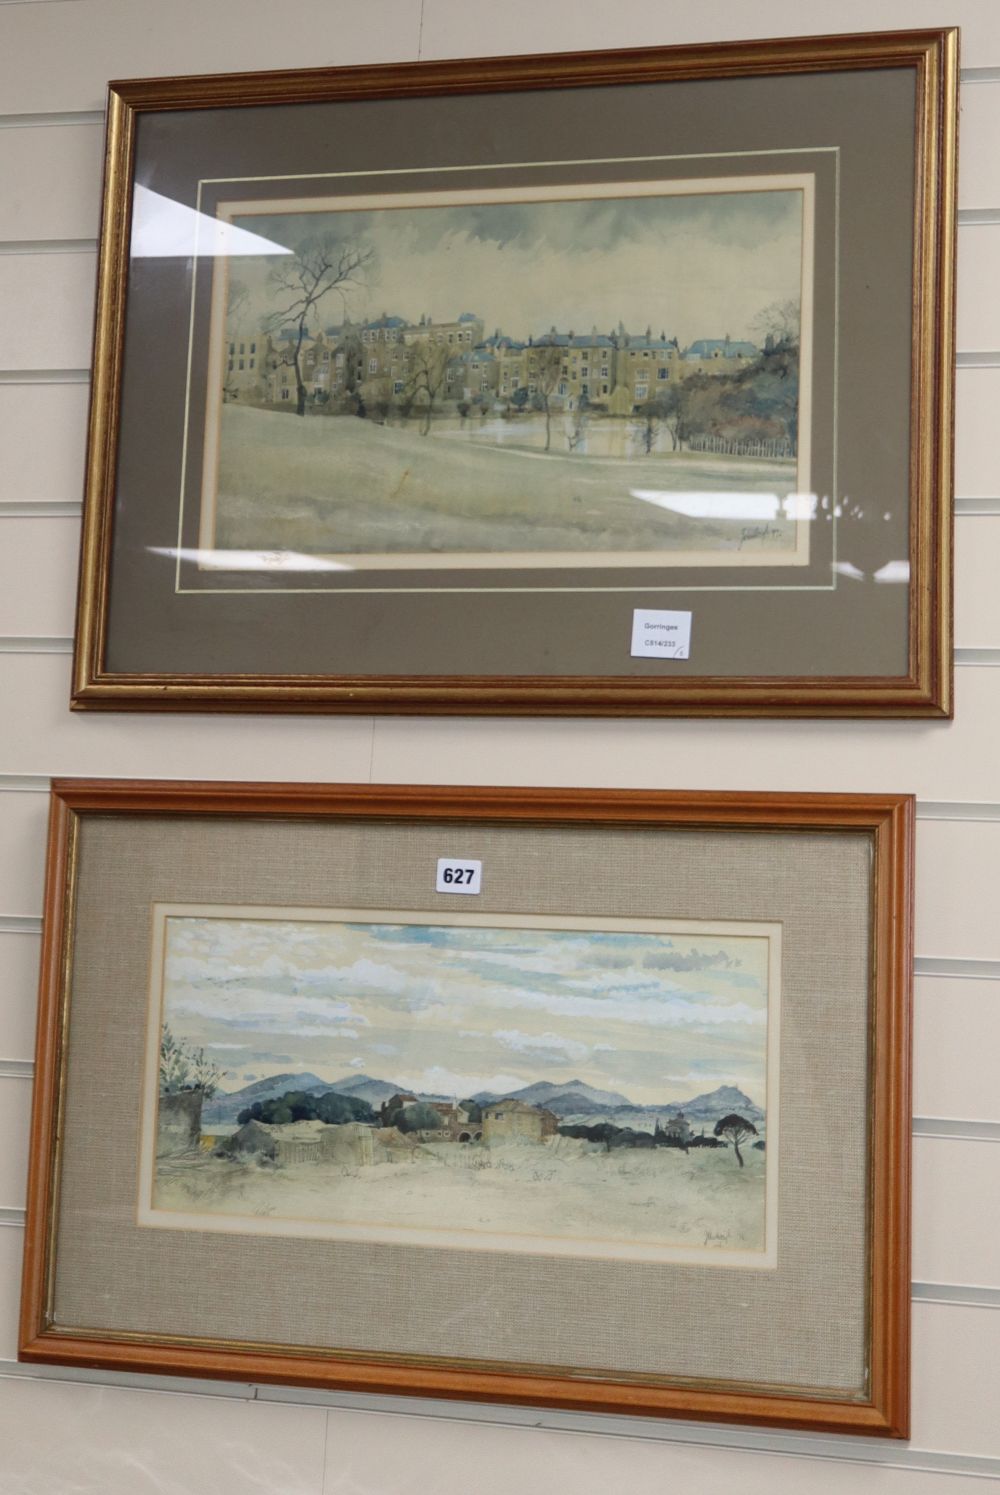 John Doyle, two watercolours, Thameside houses and Italian landscape, signed and dated 77/76, 24 x 42cm and 20 x 43cm